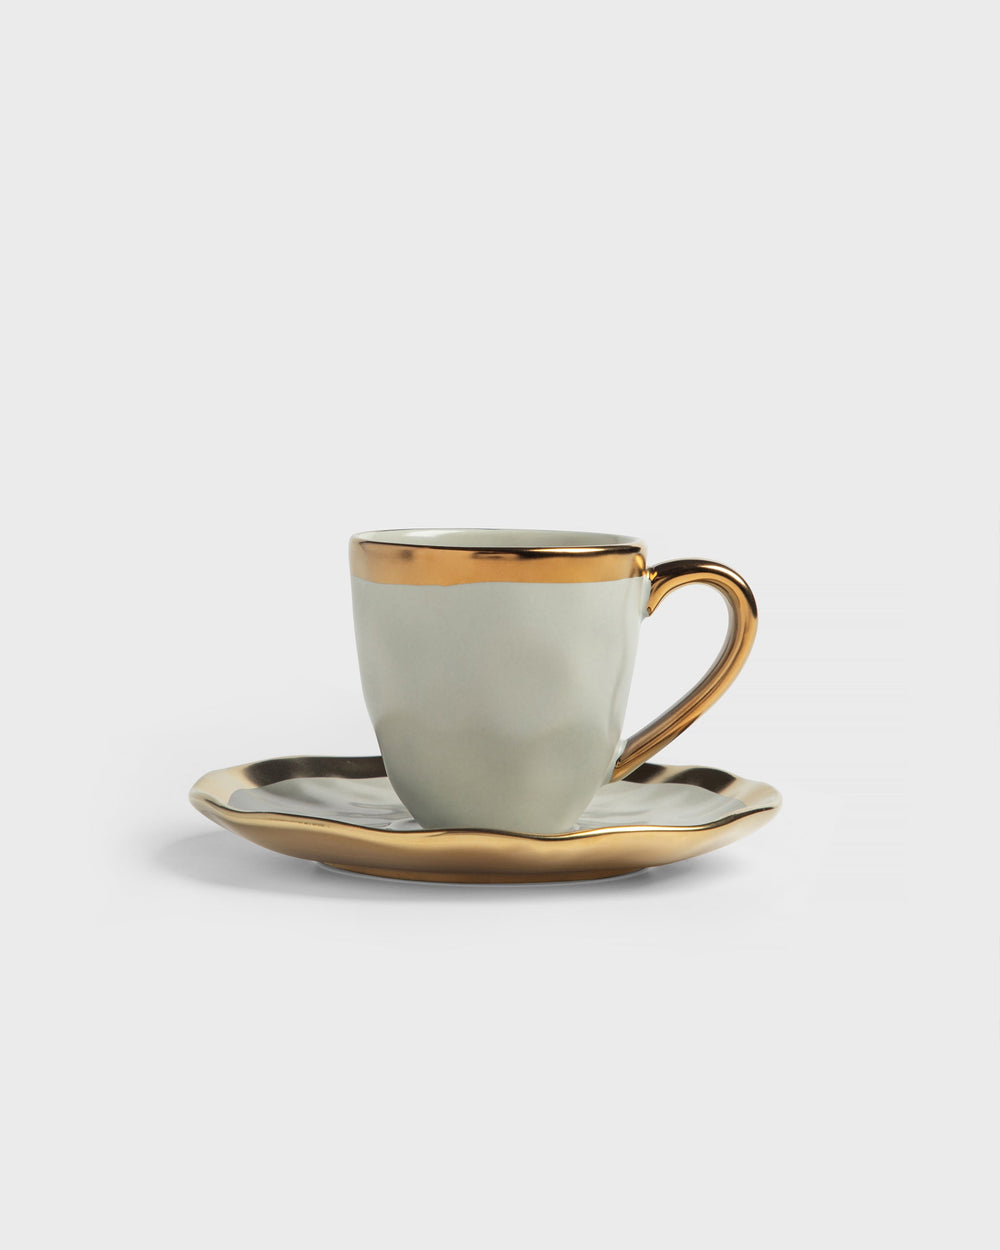 Tania Bulhoes Espresso Cup and Saucer Mediterraneo Sand